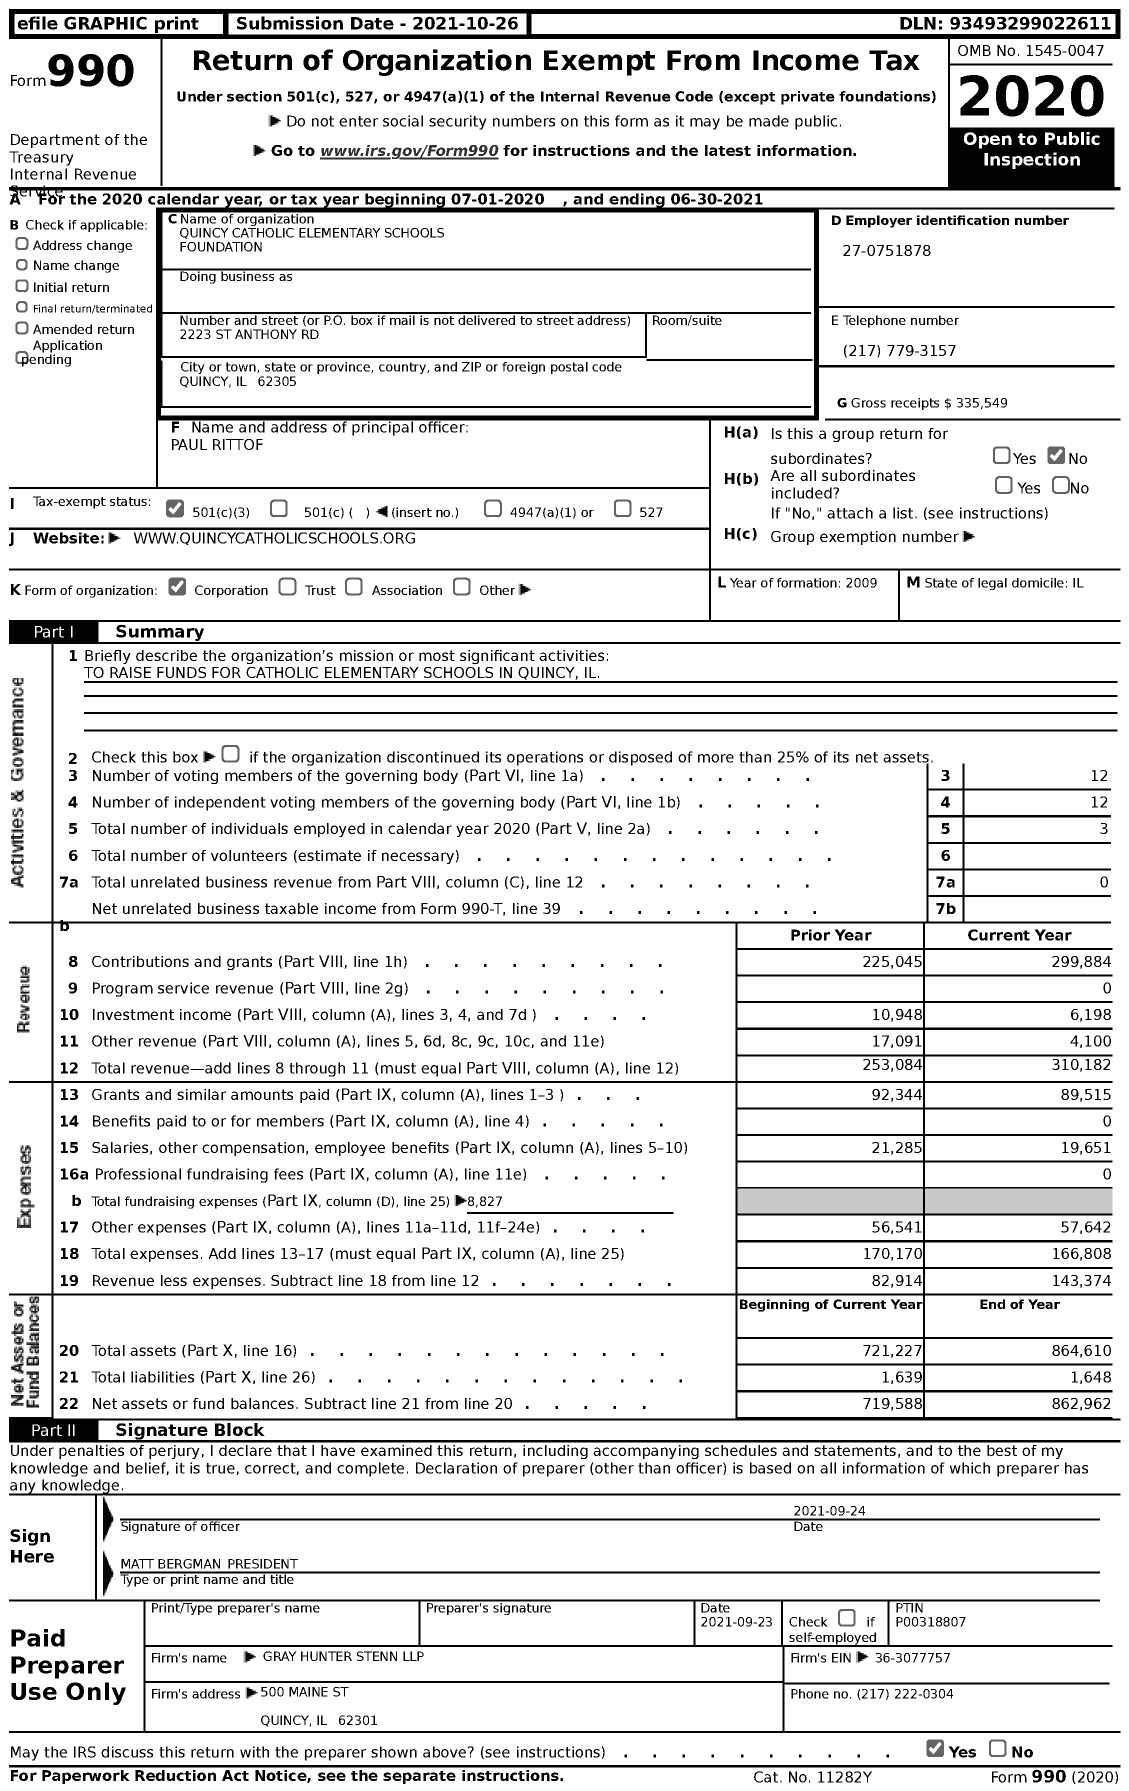 Image of first page of 2020 Form 990 for Quincy Catholic Elementary Schools Foundation